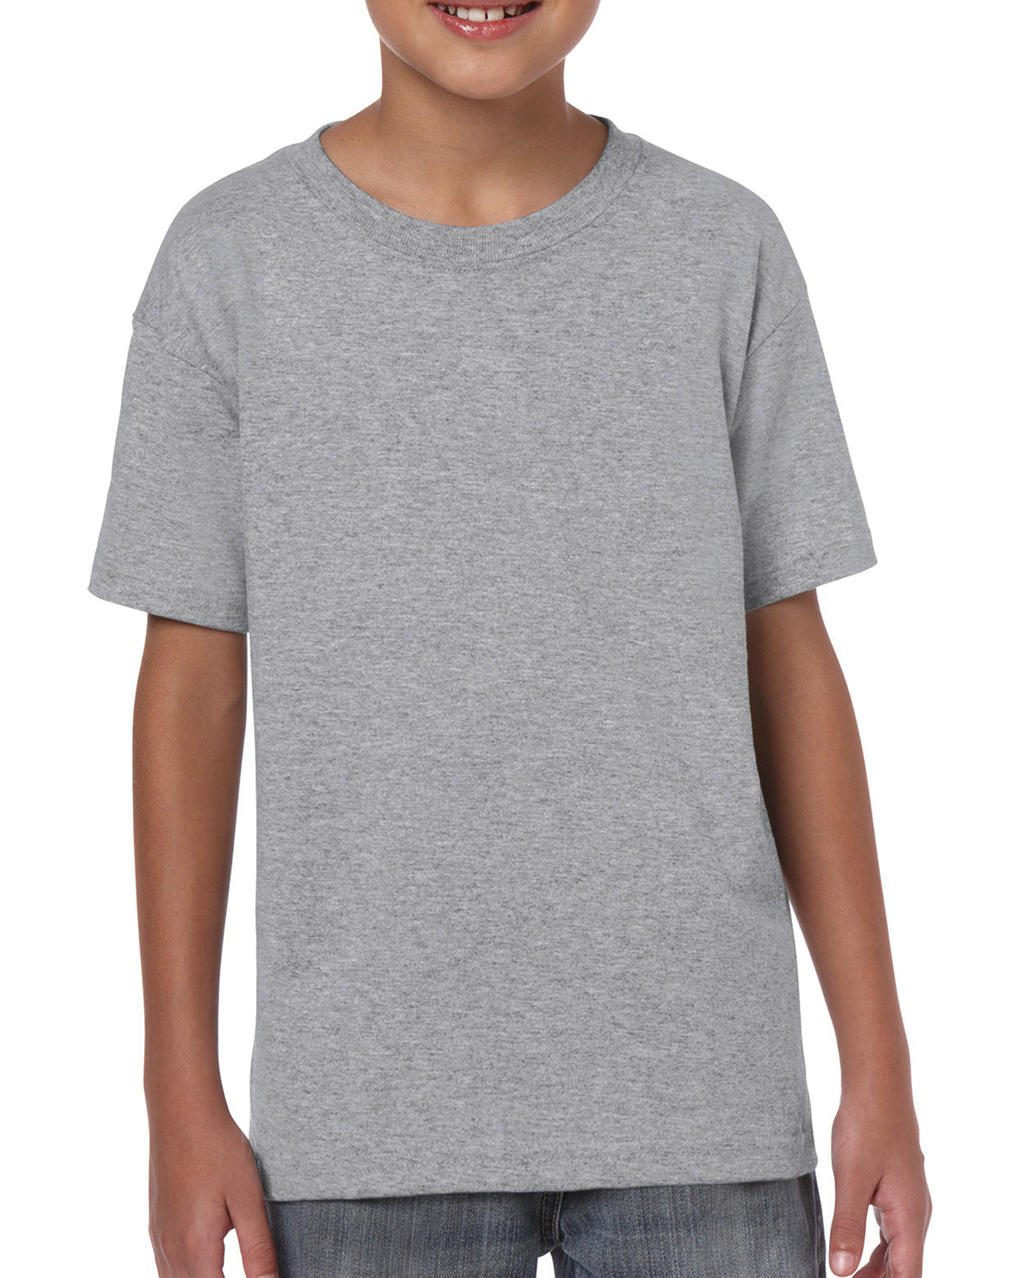  Heavy Cotton Youth T-Shirt in Farbe Sport Grey